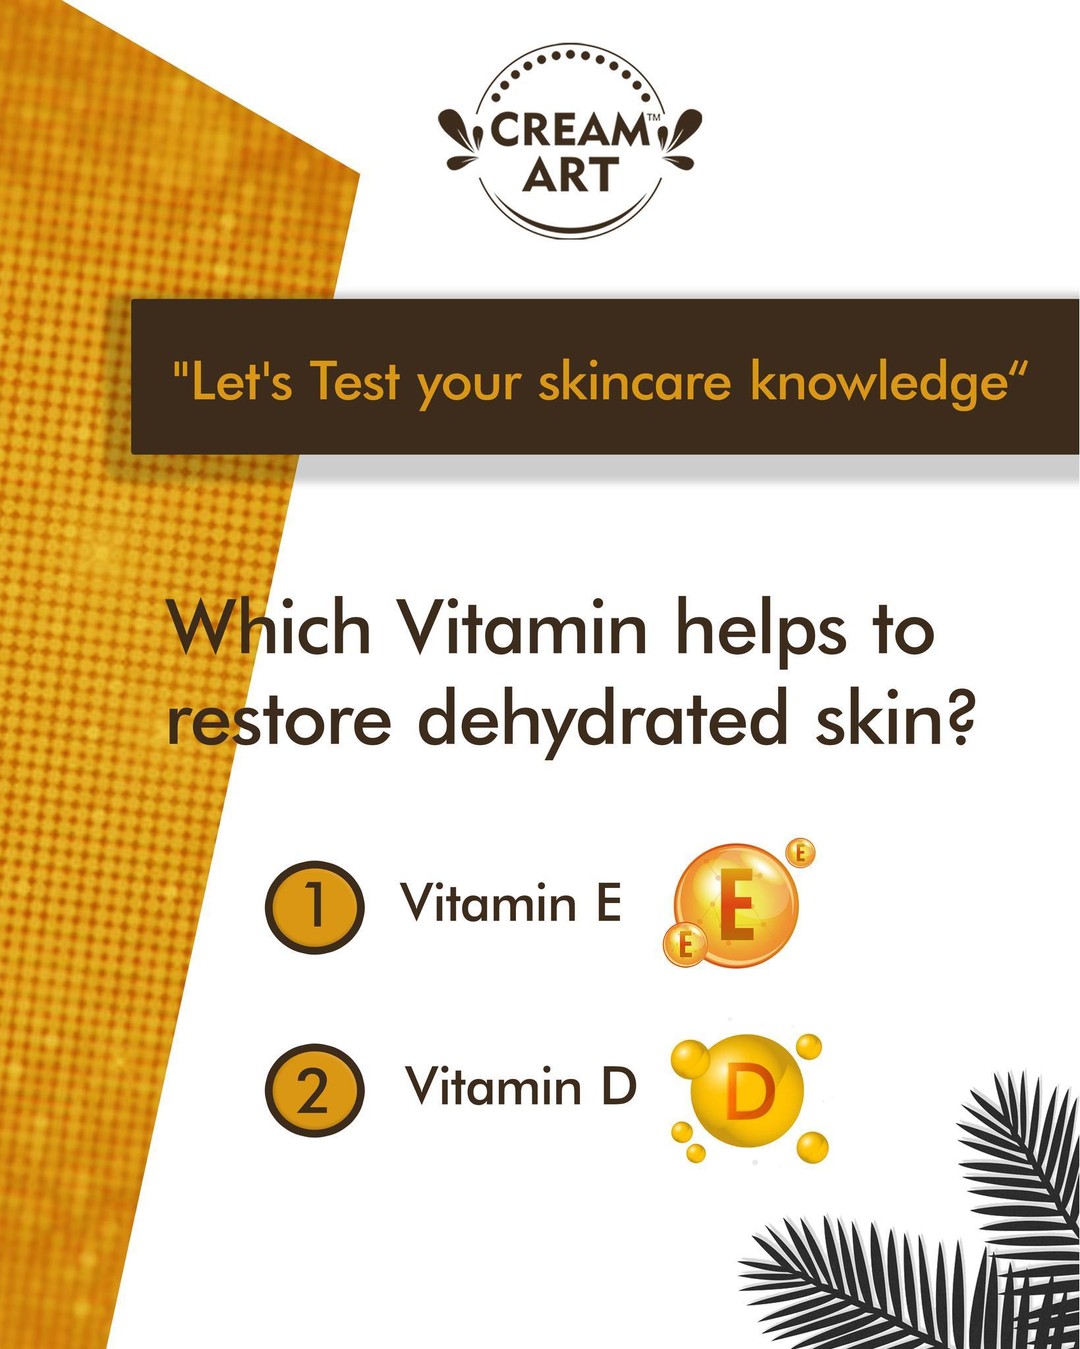 Dehydrated skin can be a nuisance, want to solve this annoyance? Answer the question, test your knowledge and we will give you a PRO TIP in the comment section!!

#hydratedskin
#skincaretip
#moisturizedskin
#creamart